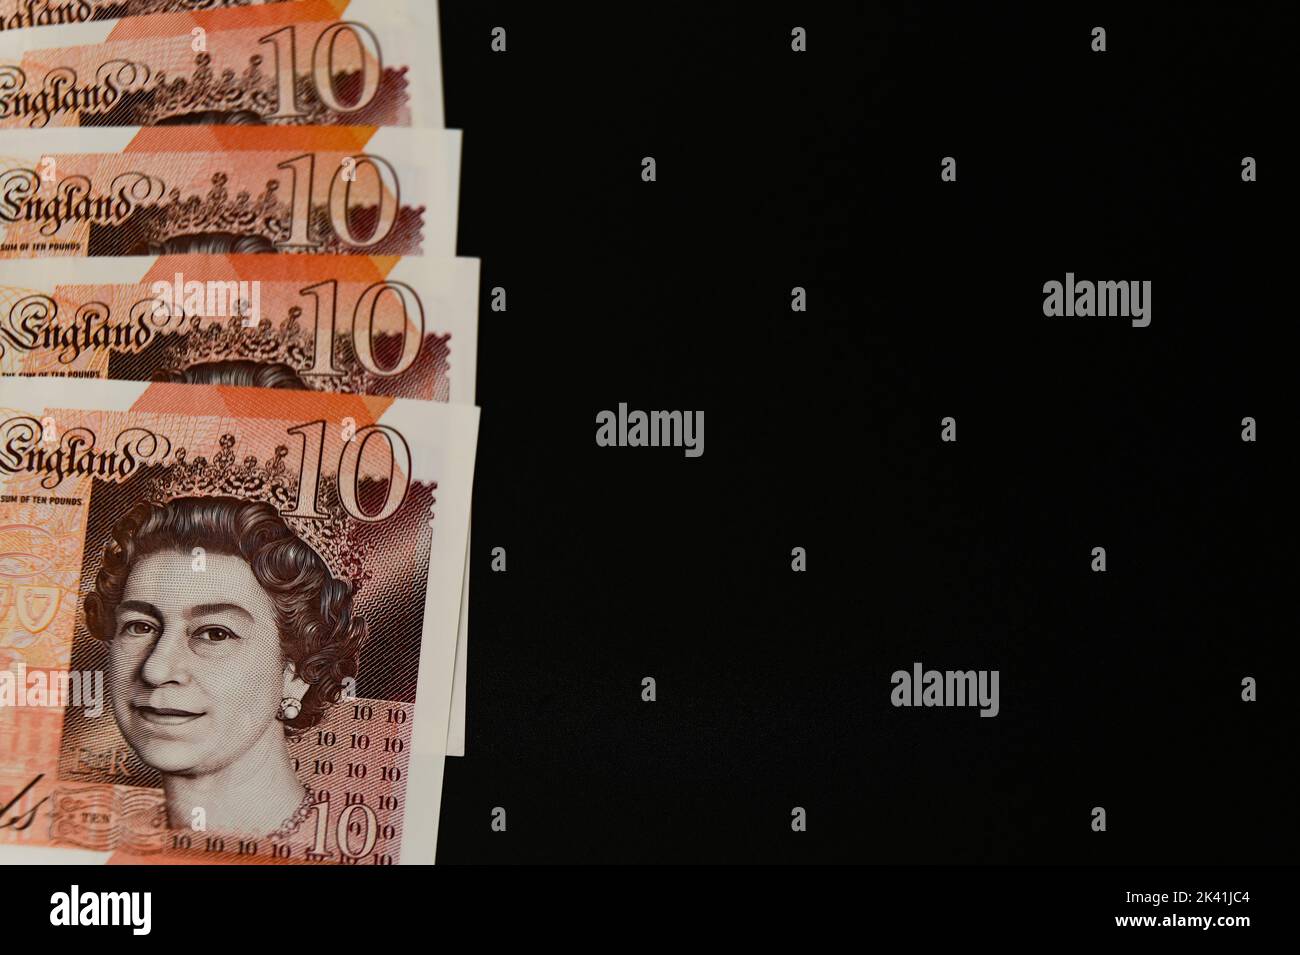 GBP money British ten pound notes currency on a plain Black background with room for wording on right of image Stock Photo